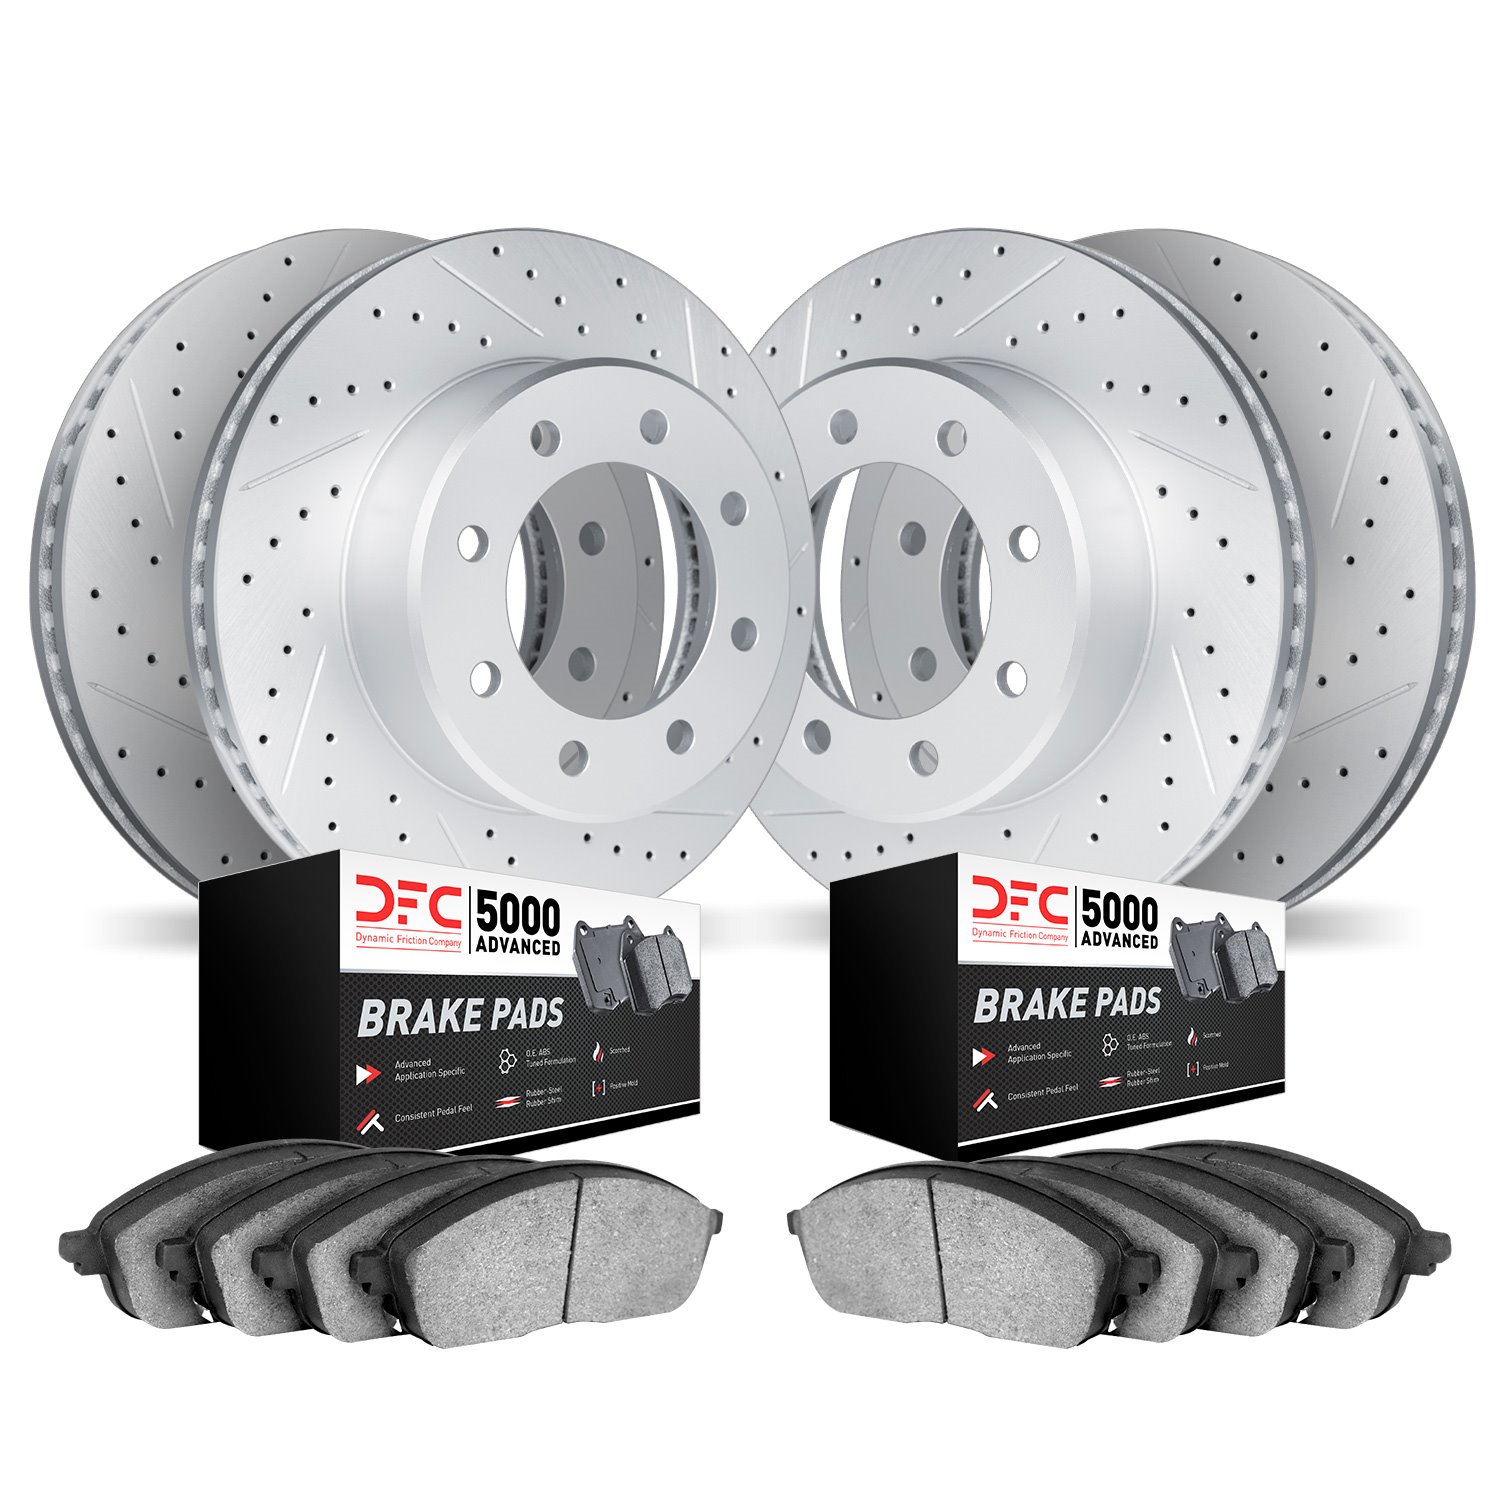 2504-54231 Geoperformance Drilled/Slotted Rotors w/5000 Advanced Brake Pads Kit, 1999-2007 Ford/Lincoln/Mercury/Mazda, Position: